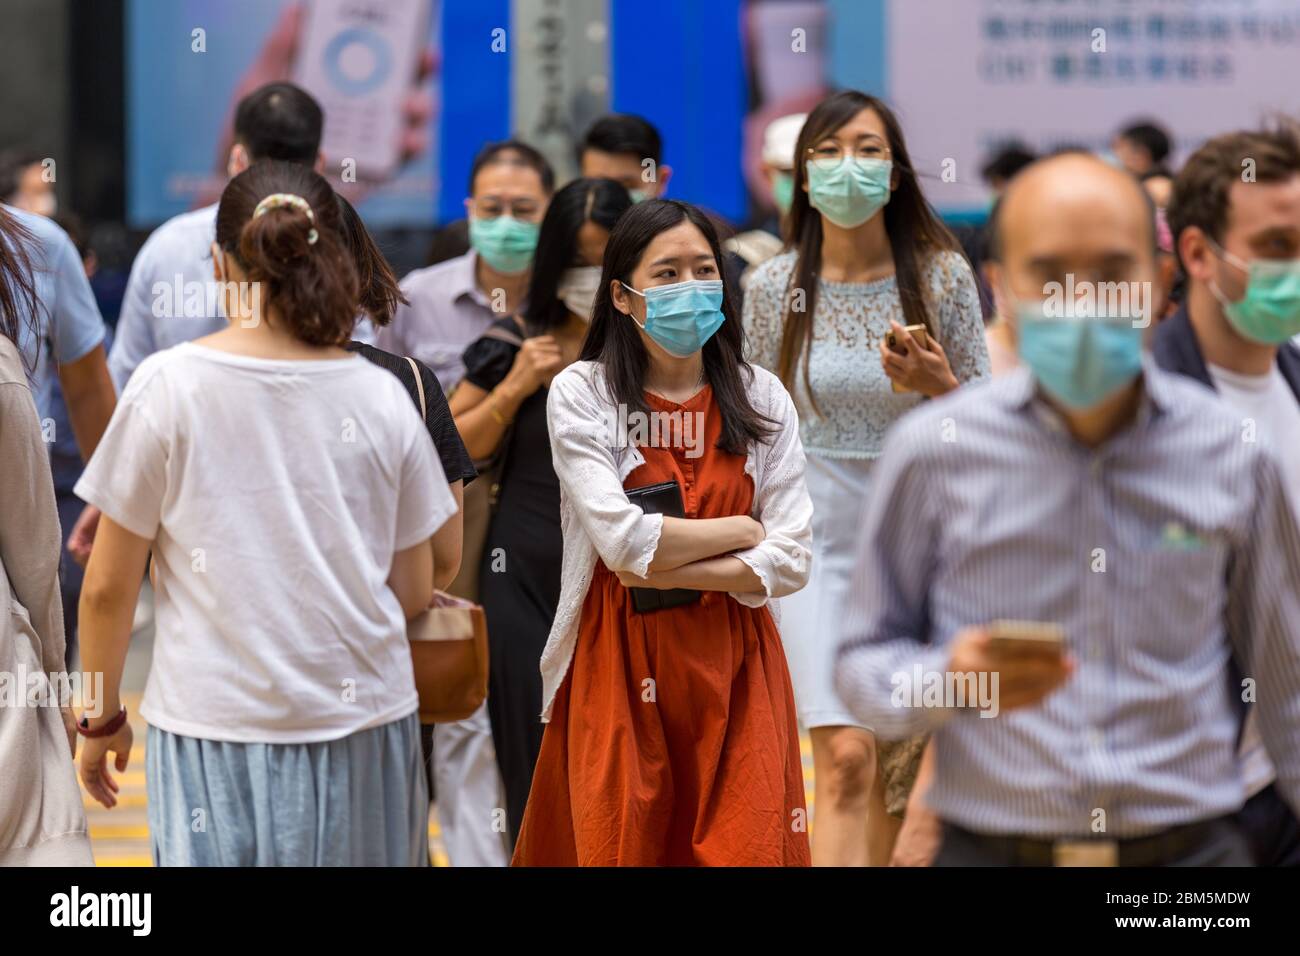 Hong Kong, Hong Kong. 7 May, 2020 Hongkongers wear surgical masks on the streets, amid the coronavirus pandemic. Today is the last day before the HK Government lifts some of the public restrictions. Hong Kong has now had a run of no locally transmitted infections for 18 days. Credit: David Ogg/Alamy Live News Stock Photo